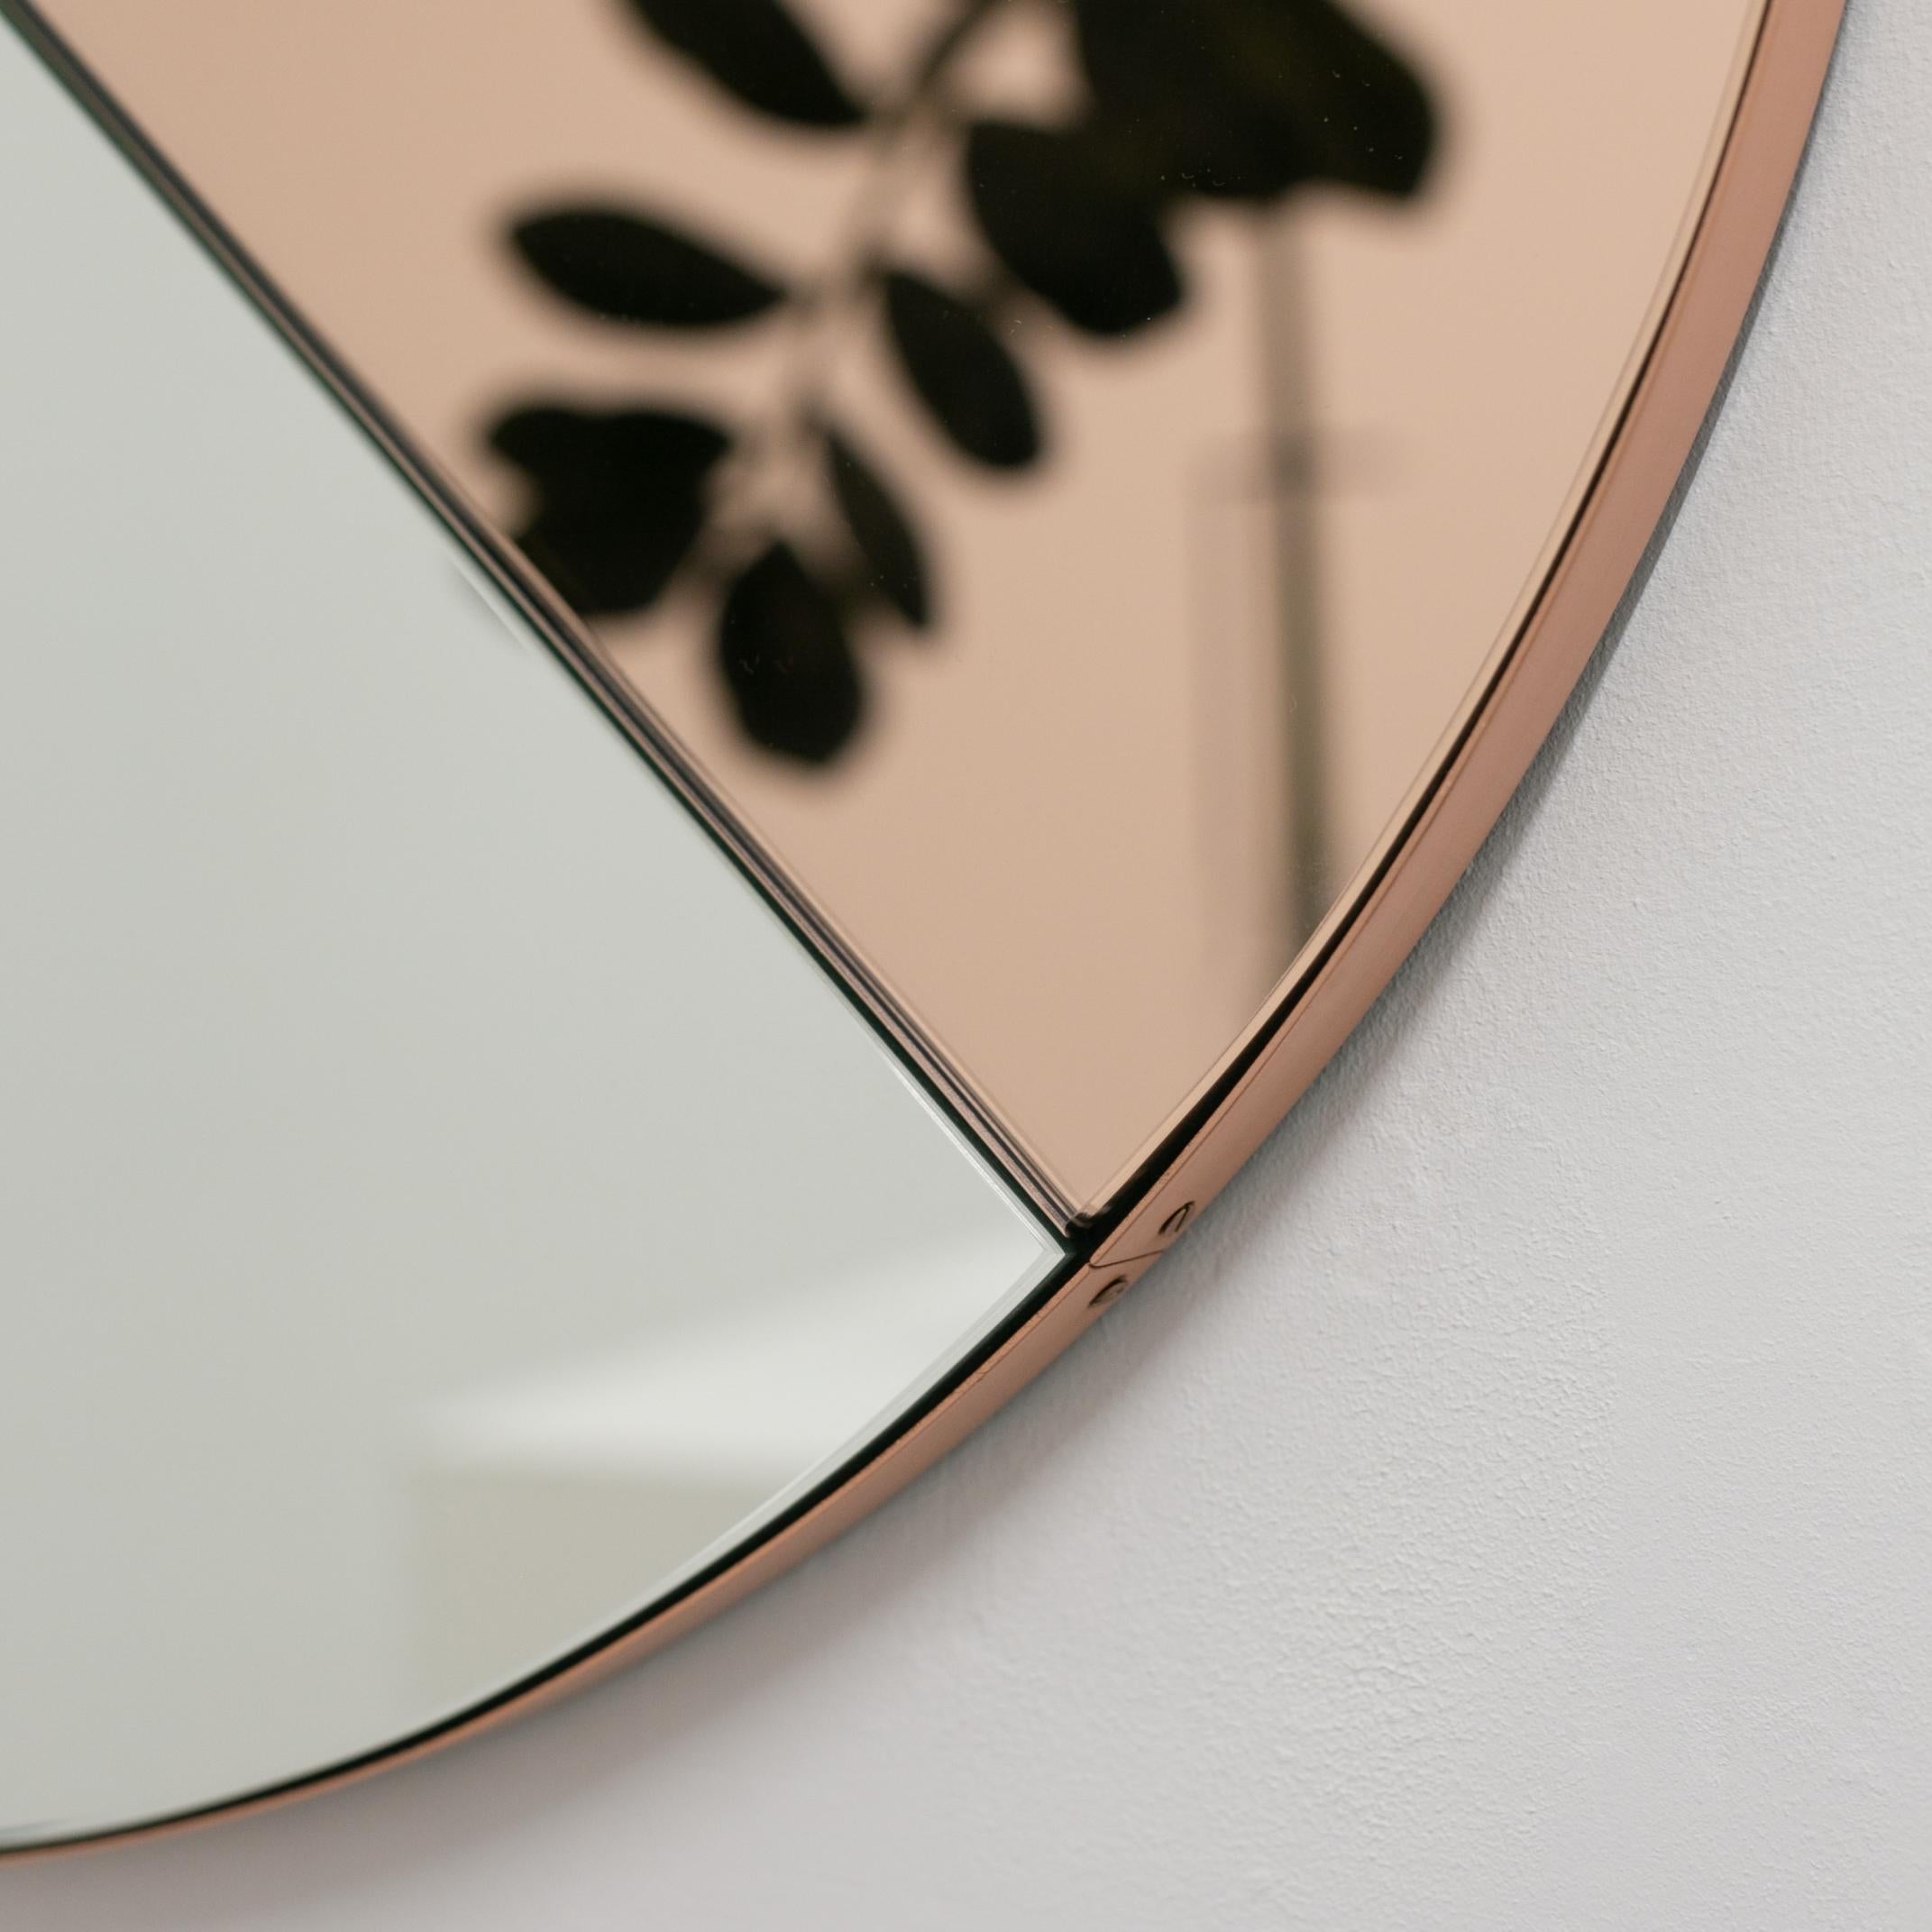 Brushed Orbis Dualis Mixed Rose Gold and Silver Round Mirror with Copper Frame, Medium For Sale